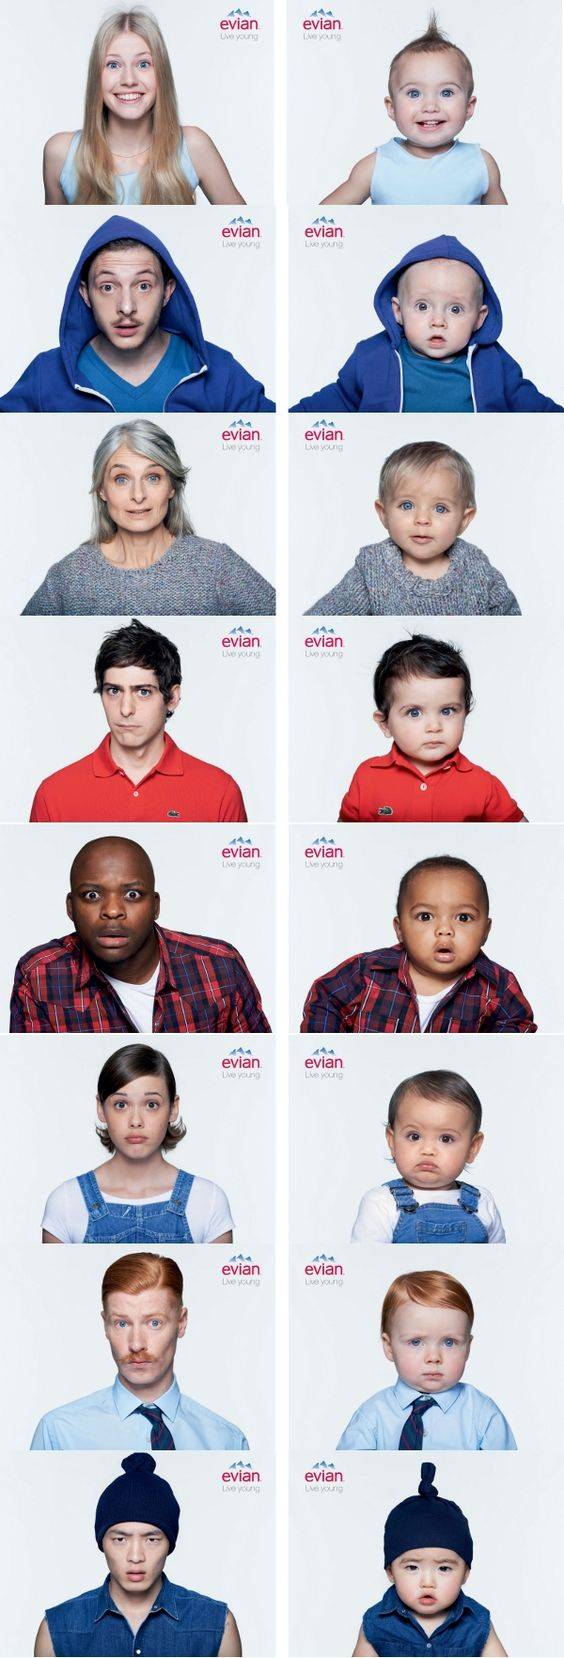 Evian Live Young Adult - Baby Comparison Print Ads // Creative Print Ad Campaigns & Advertisements